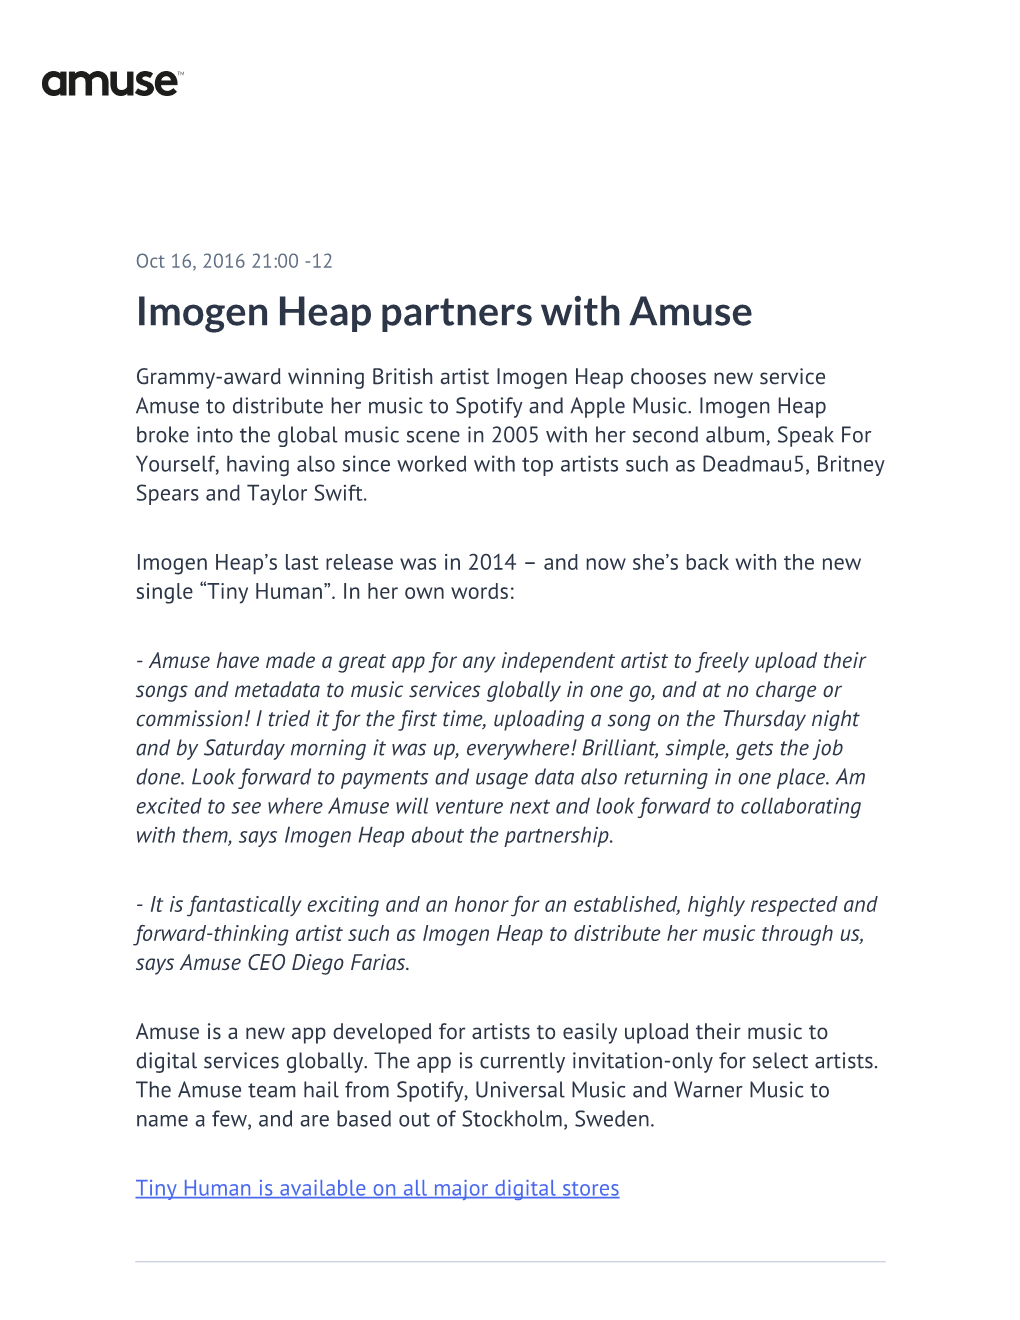 Imogen Heap Partners with Amuse